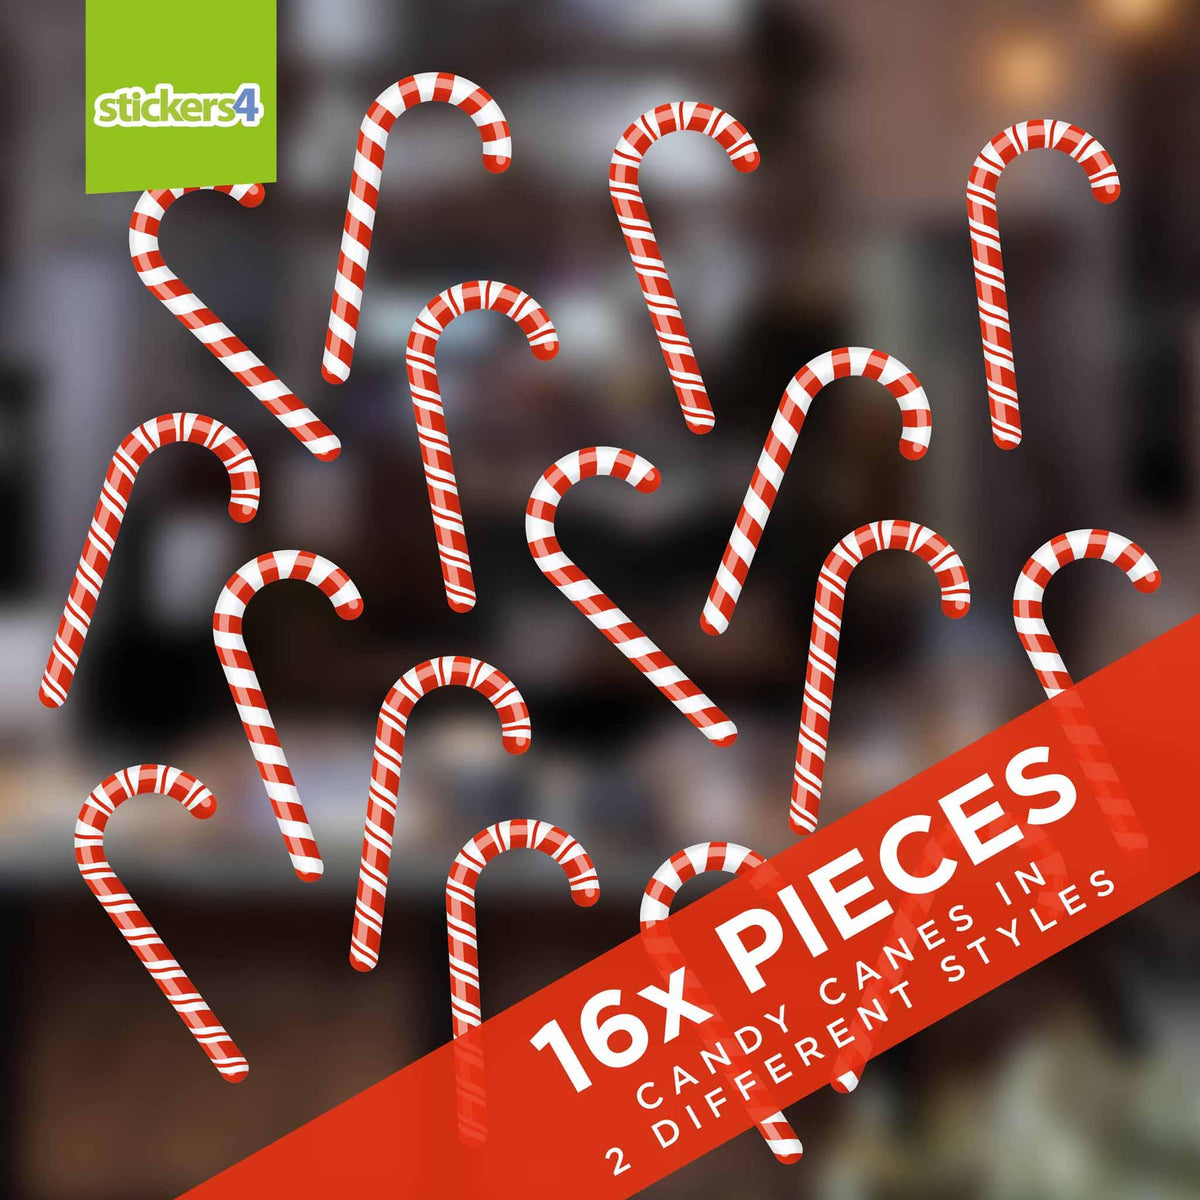 Set of 16 Candy Cane Window Cling Stickers Christmas Window Display